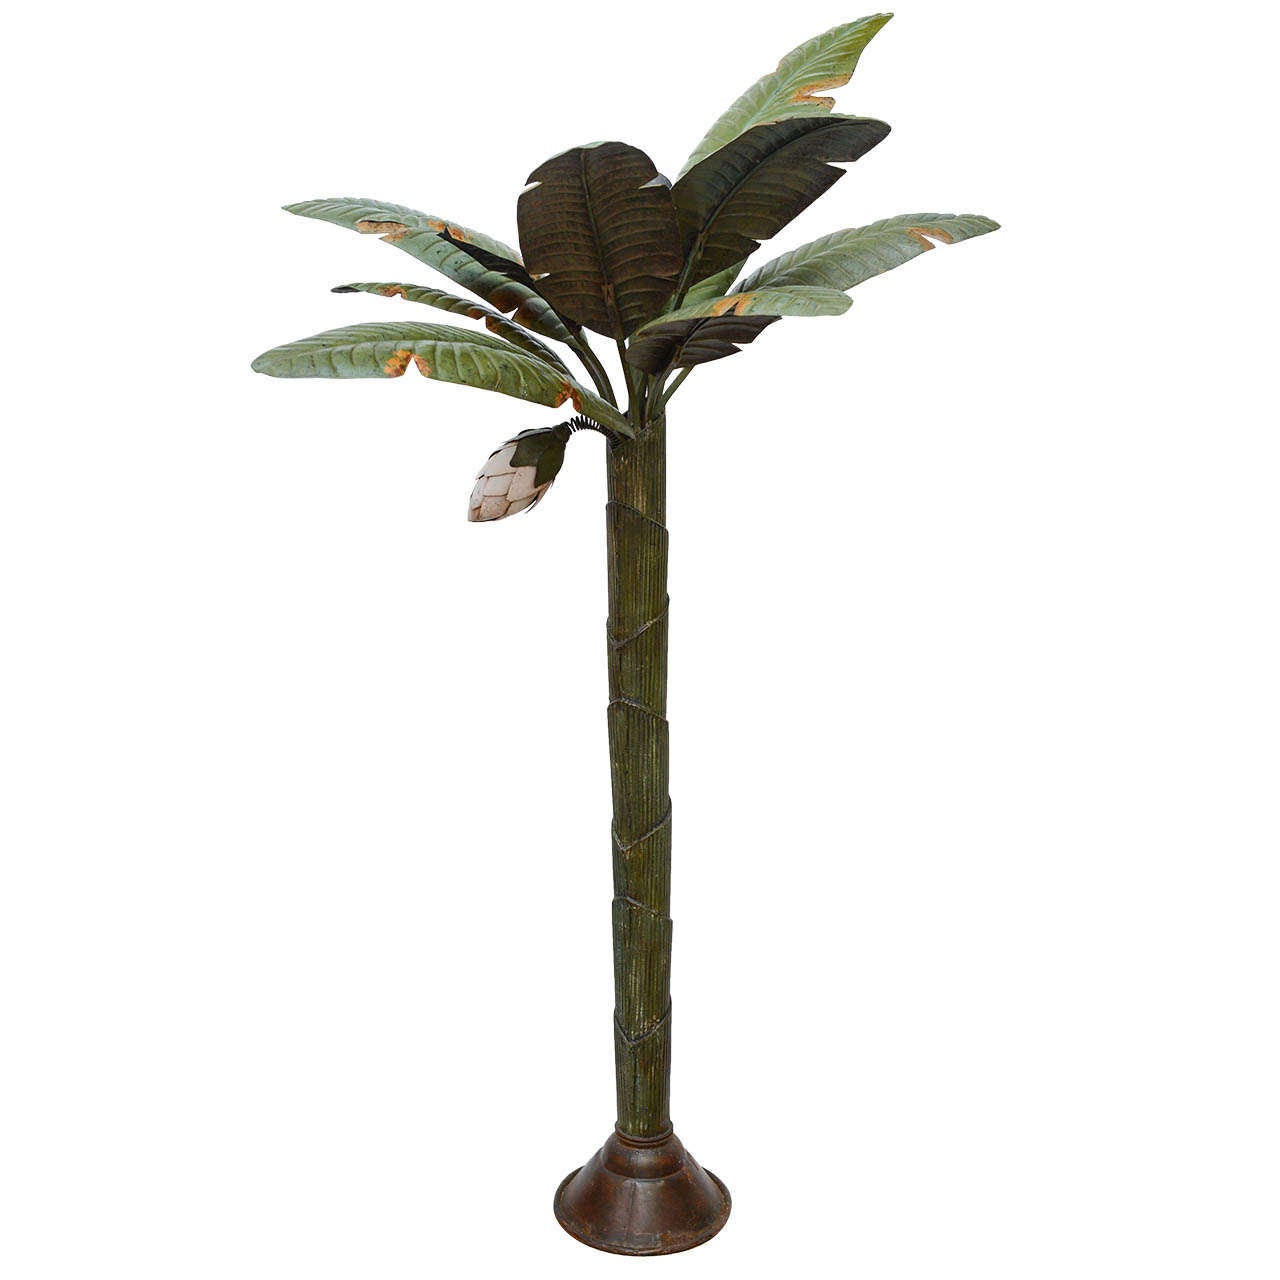 Painted Tole Freestanding Palm Tree Sculpture